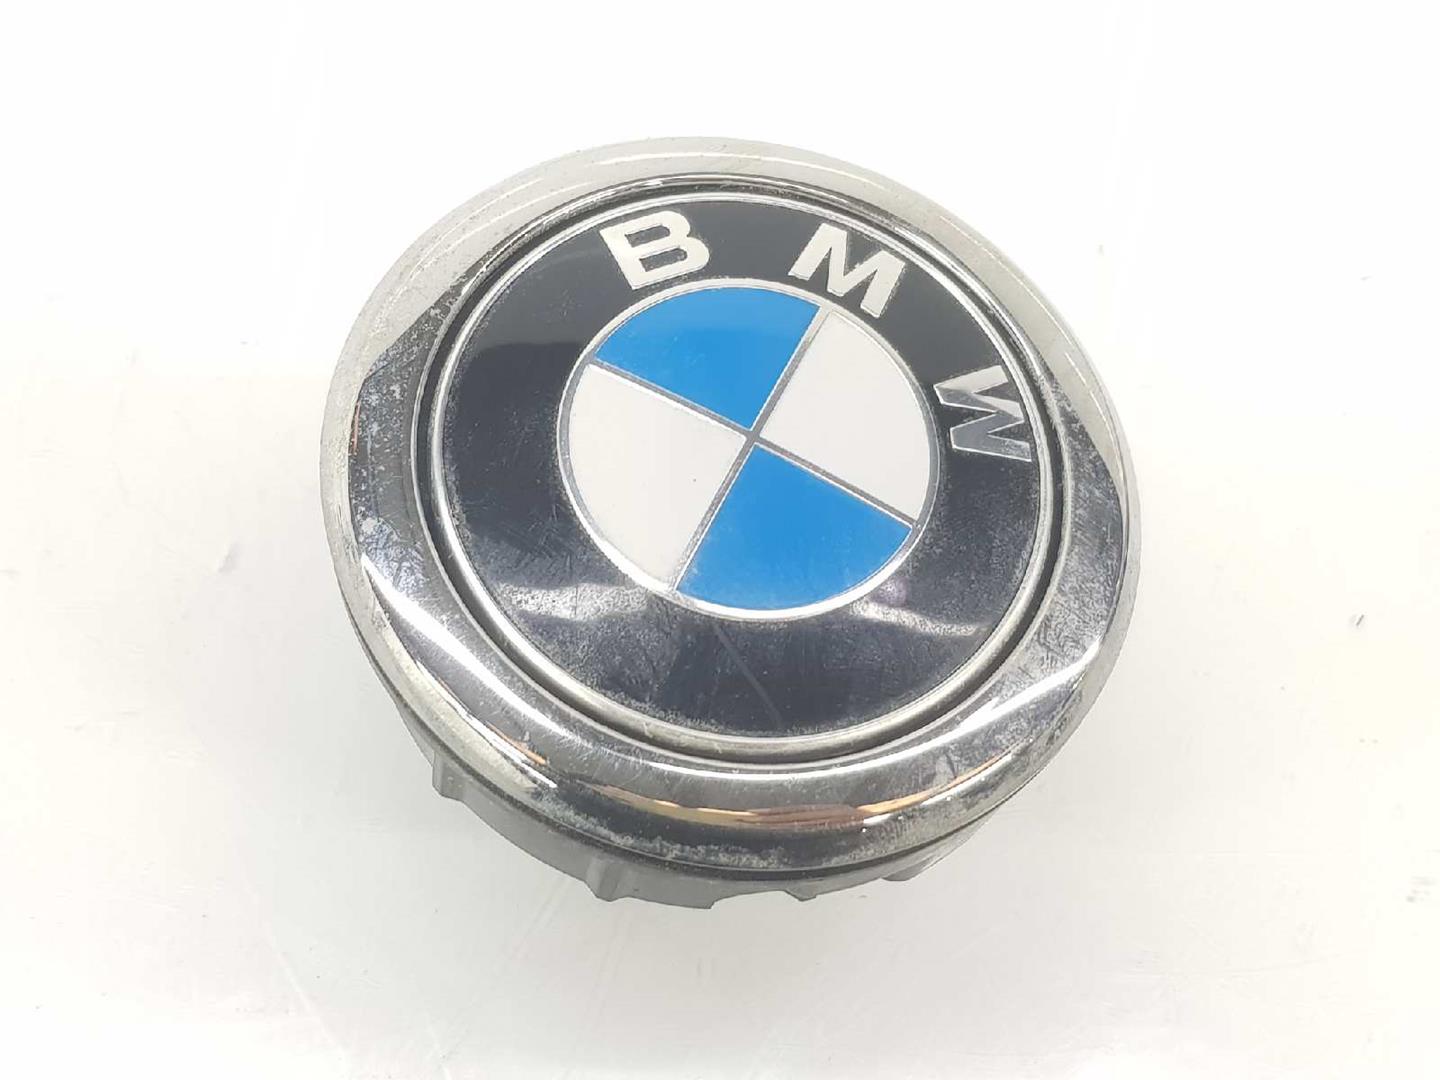 BMW 1 Series F20/F21 (2011-2020) Other Body Parts 51247248535, 51247248535, 2222DL 19750493